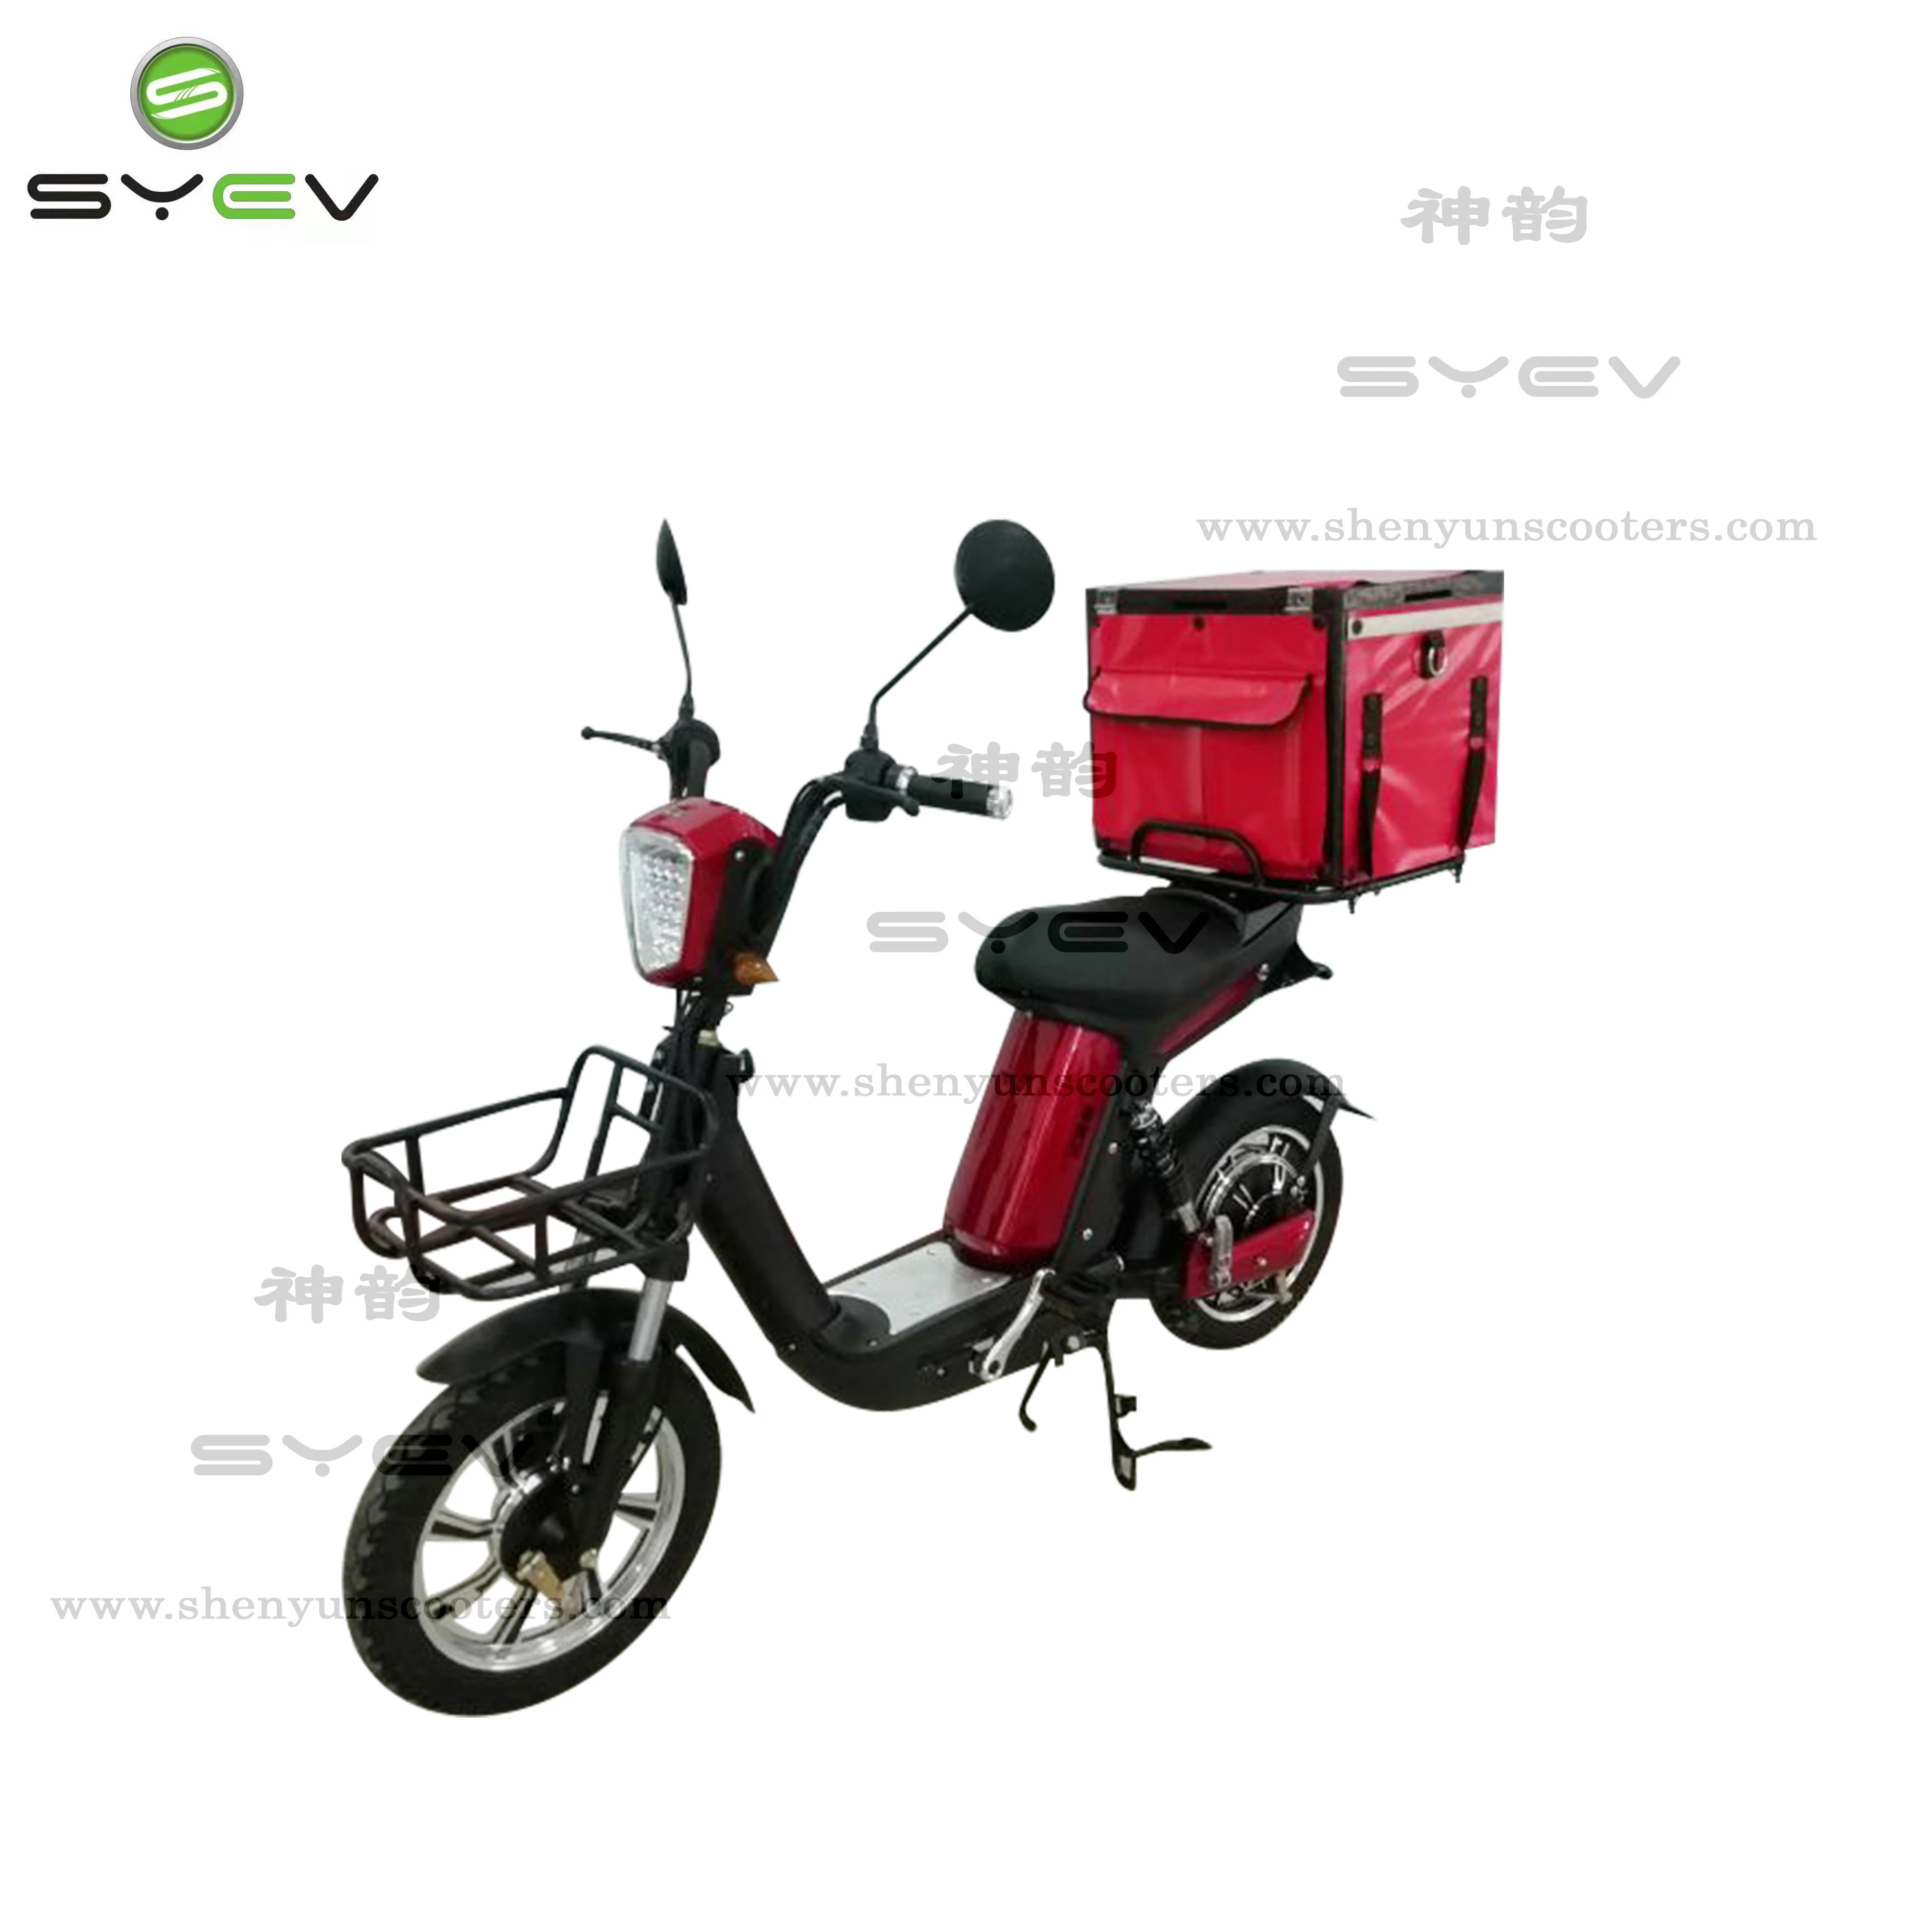 Syev 350W/500W Portable Battery Electric Moped Electric Scooter with Delivery Box